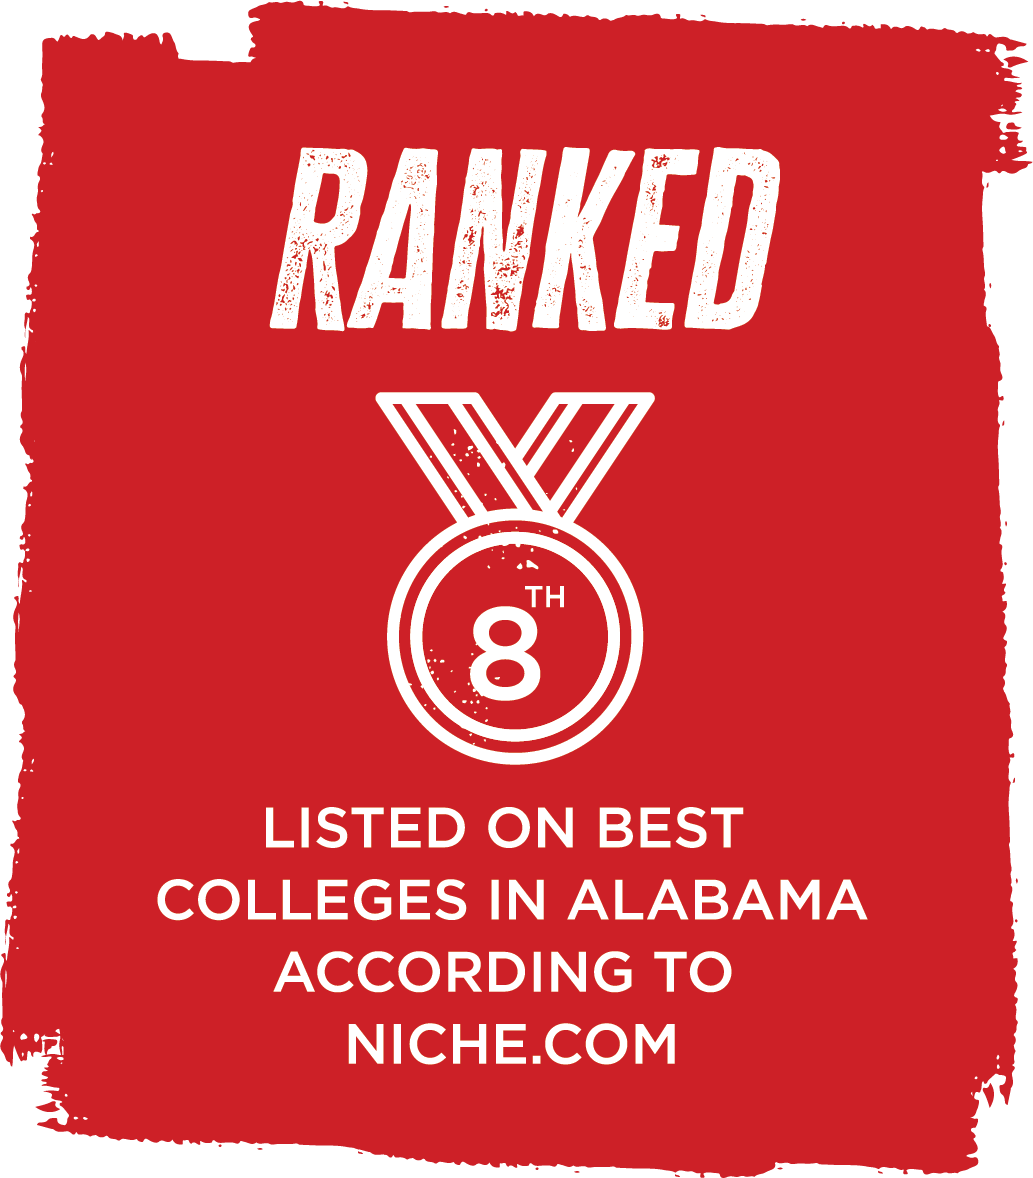 Ranked 8th listed on best colleges in Alabama according to niche.com